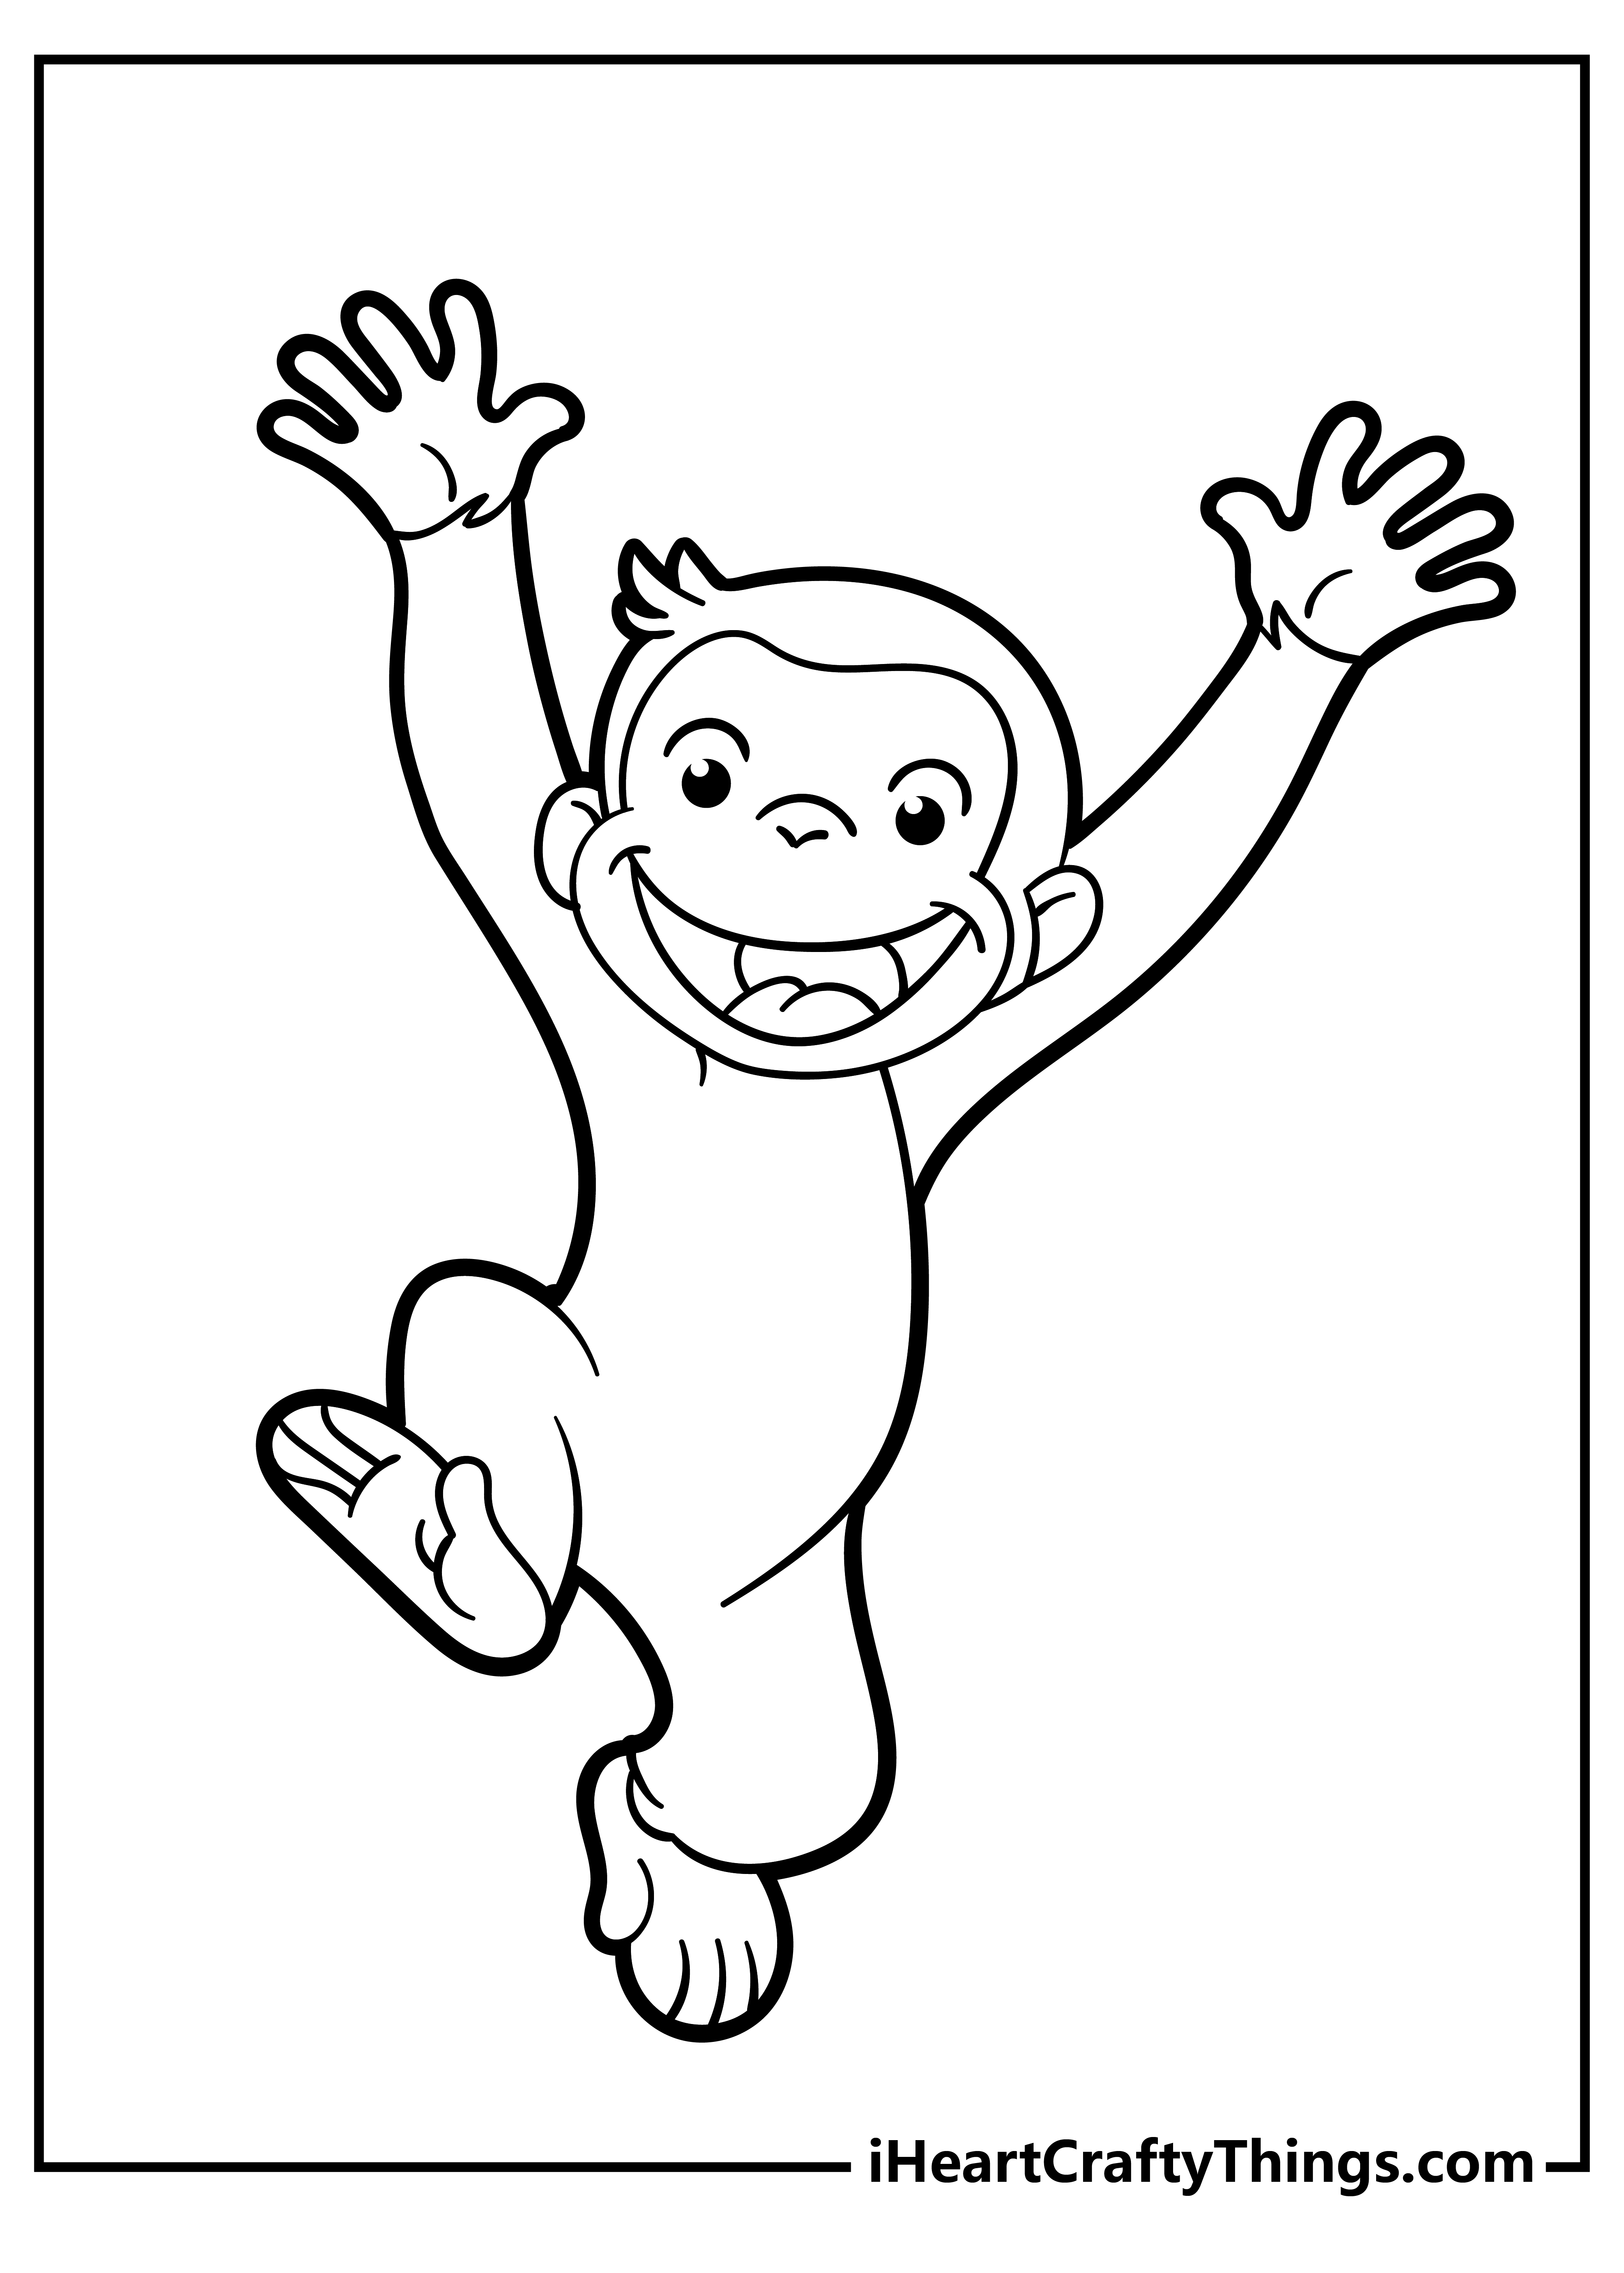 Curious George Coloring Pages for preschoolers free printable